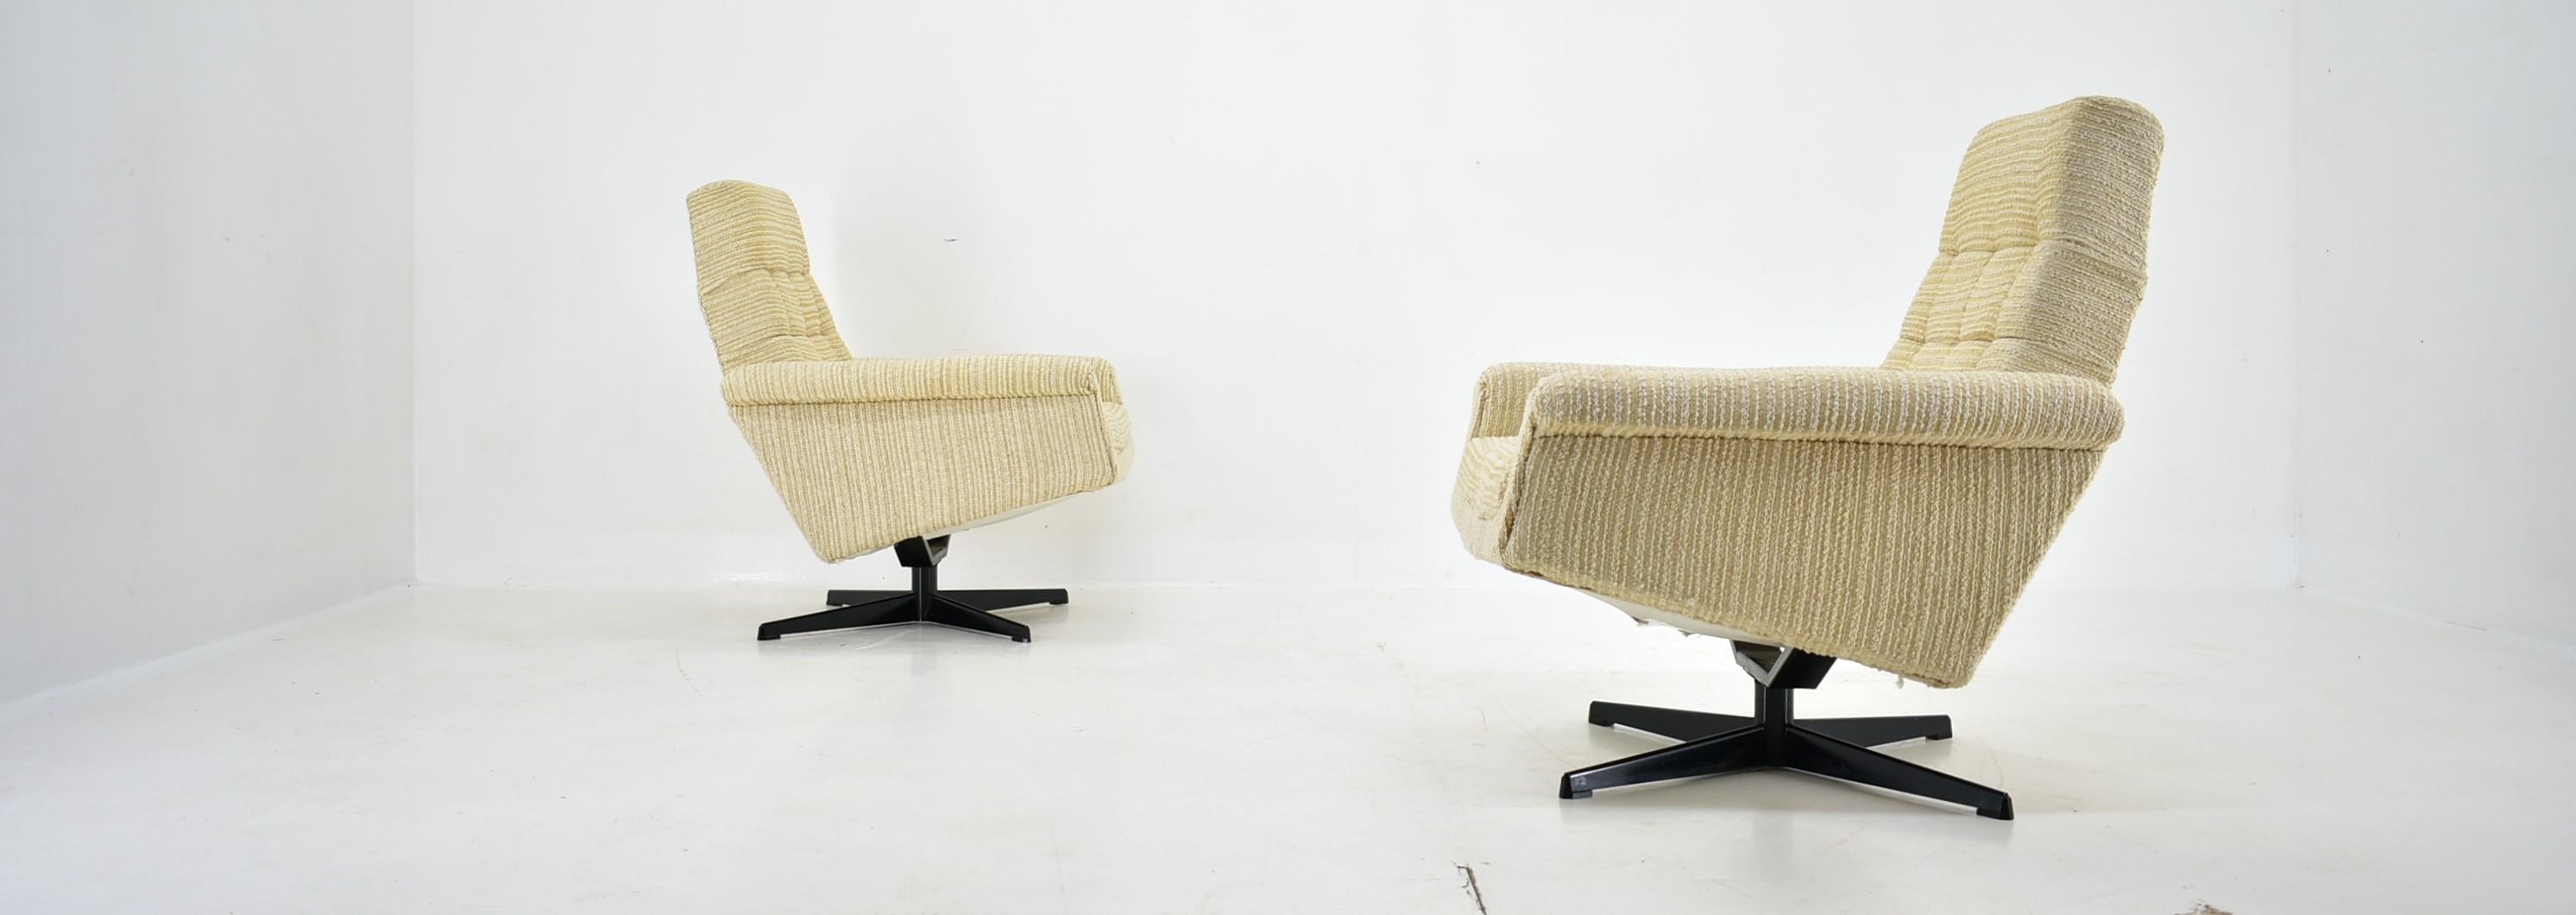 Pair of Armchairs, Tabouret by Morávek a Munzar, 1968s For Sale 9